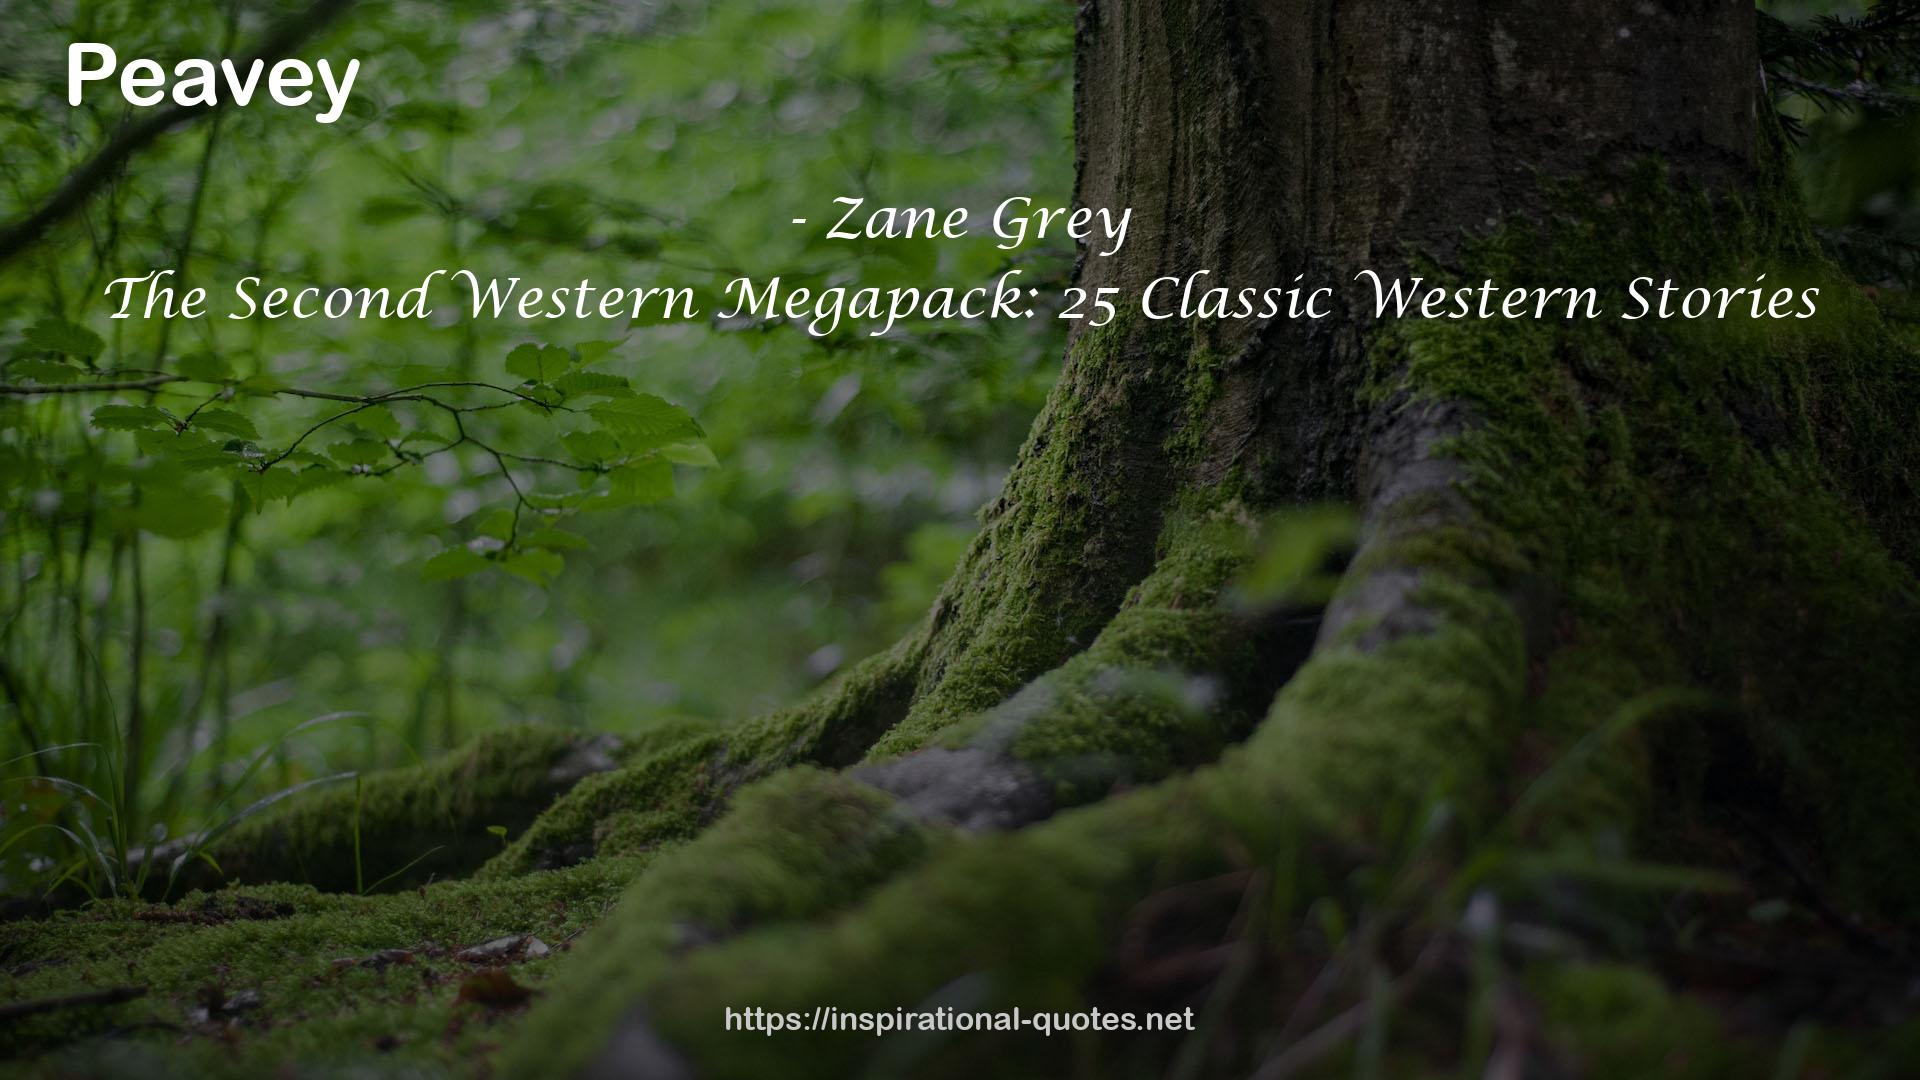 The Second Western Megapack: 25 Classic Western Stories QUOTES